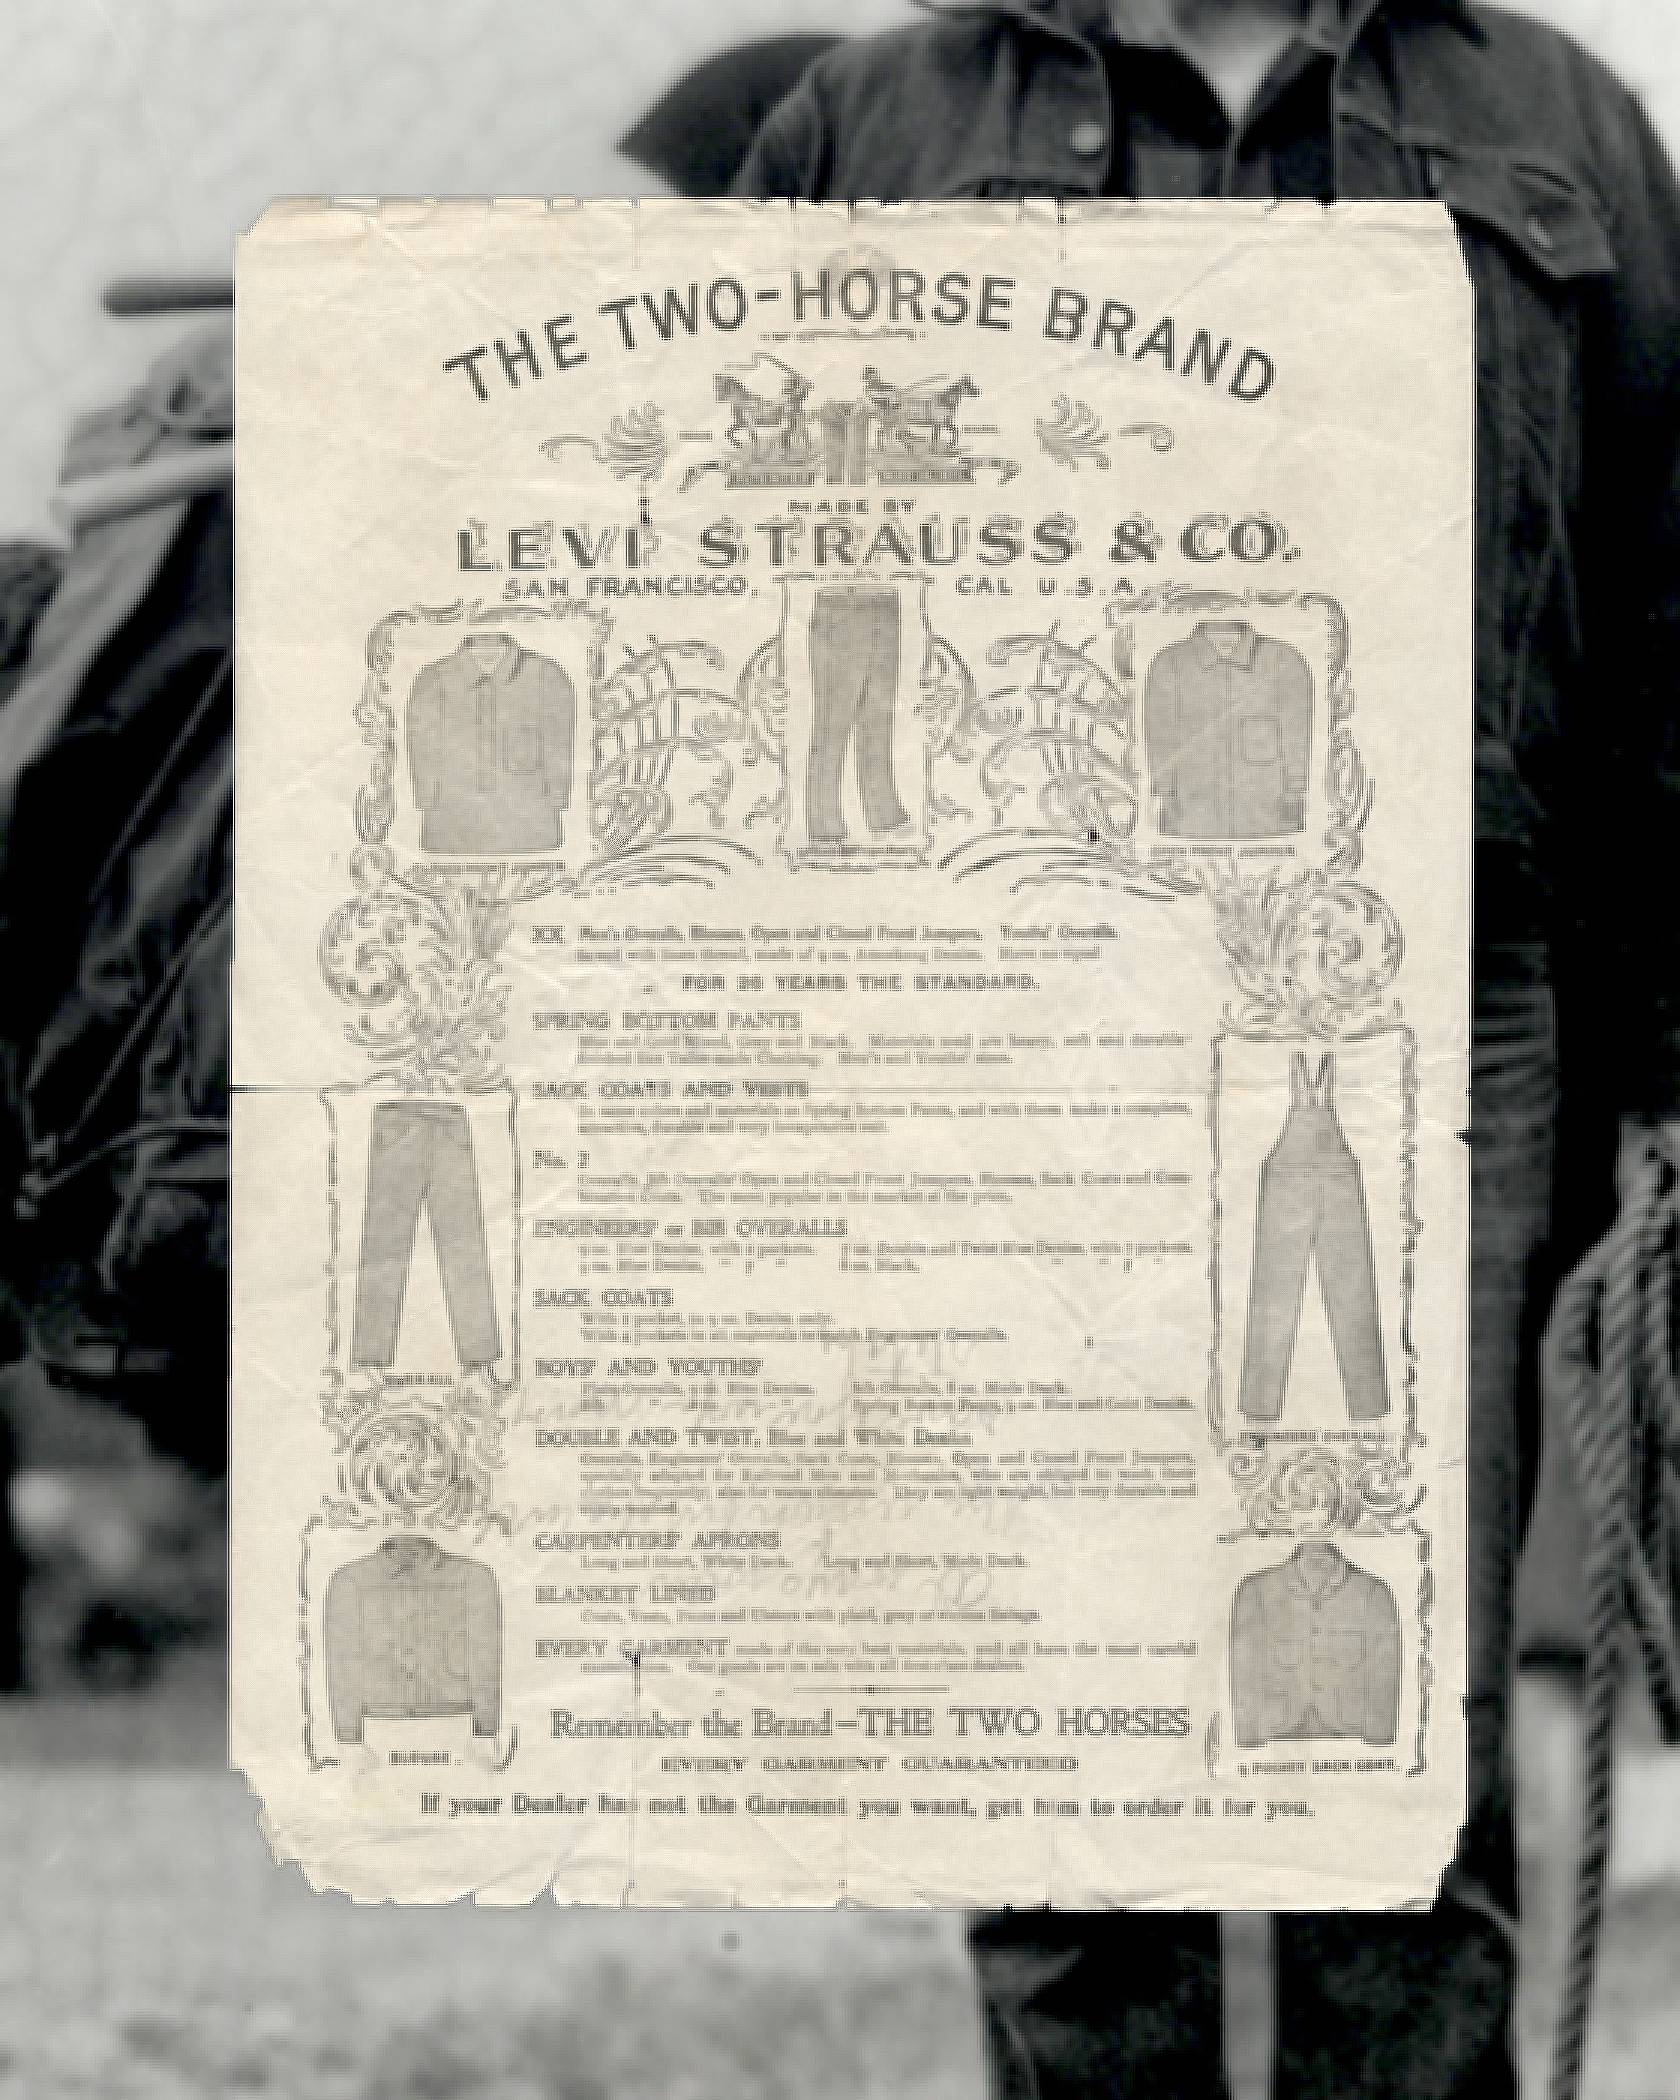 An old ad for Levi's